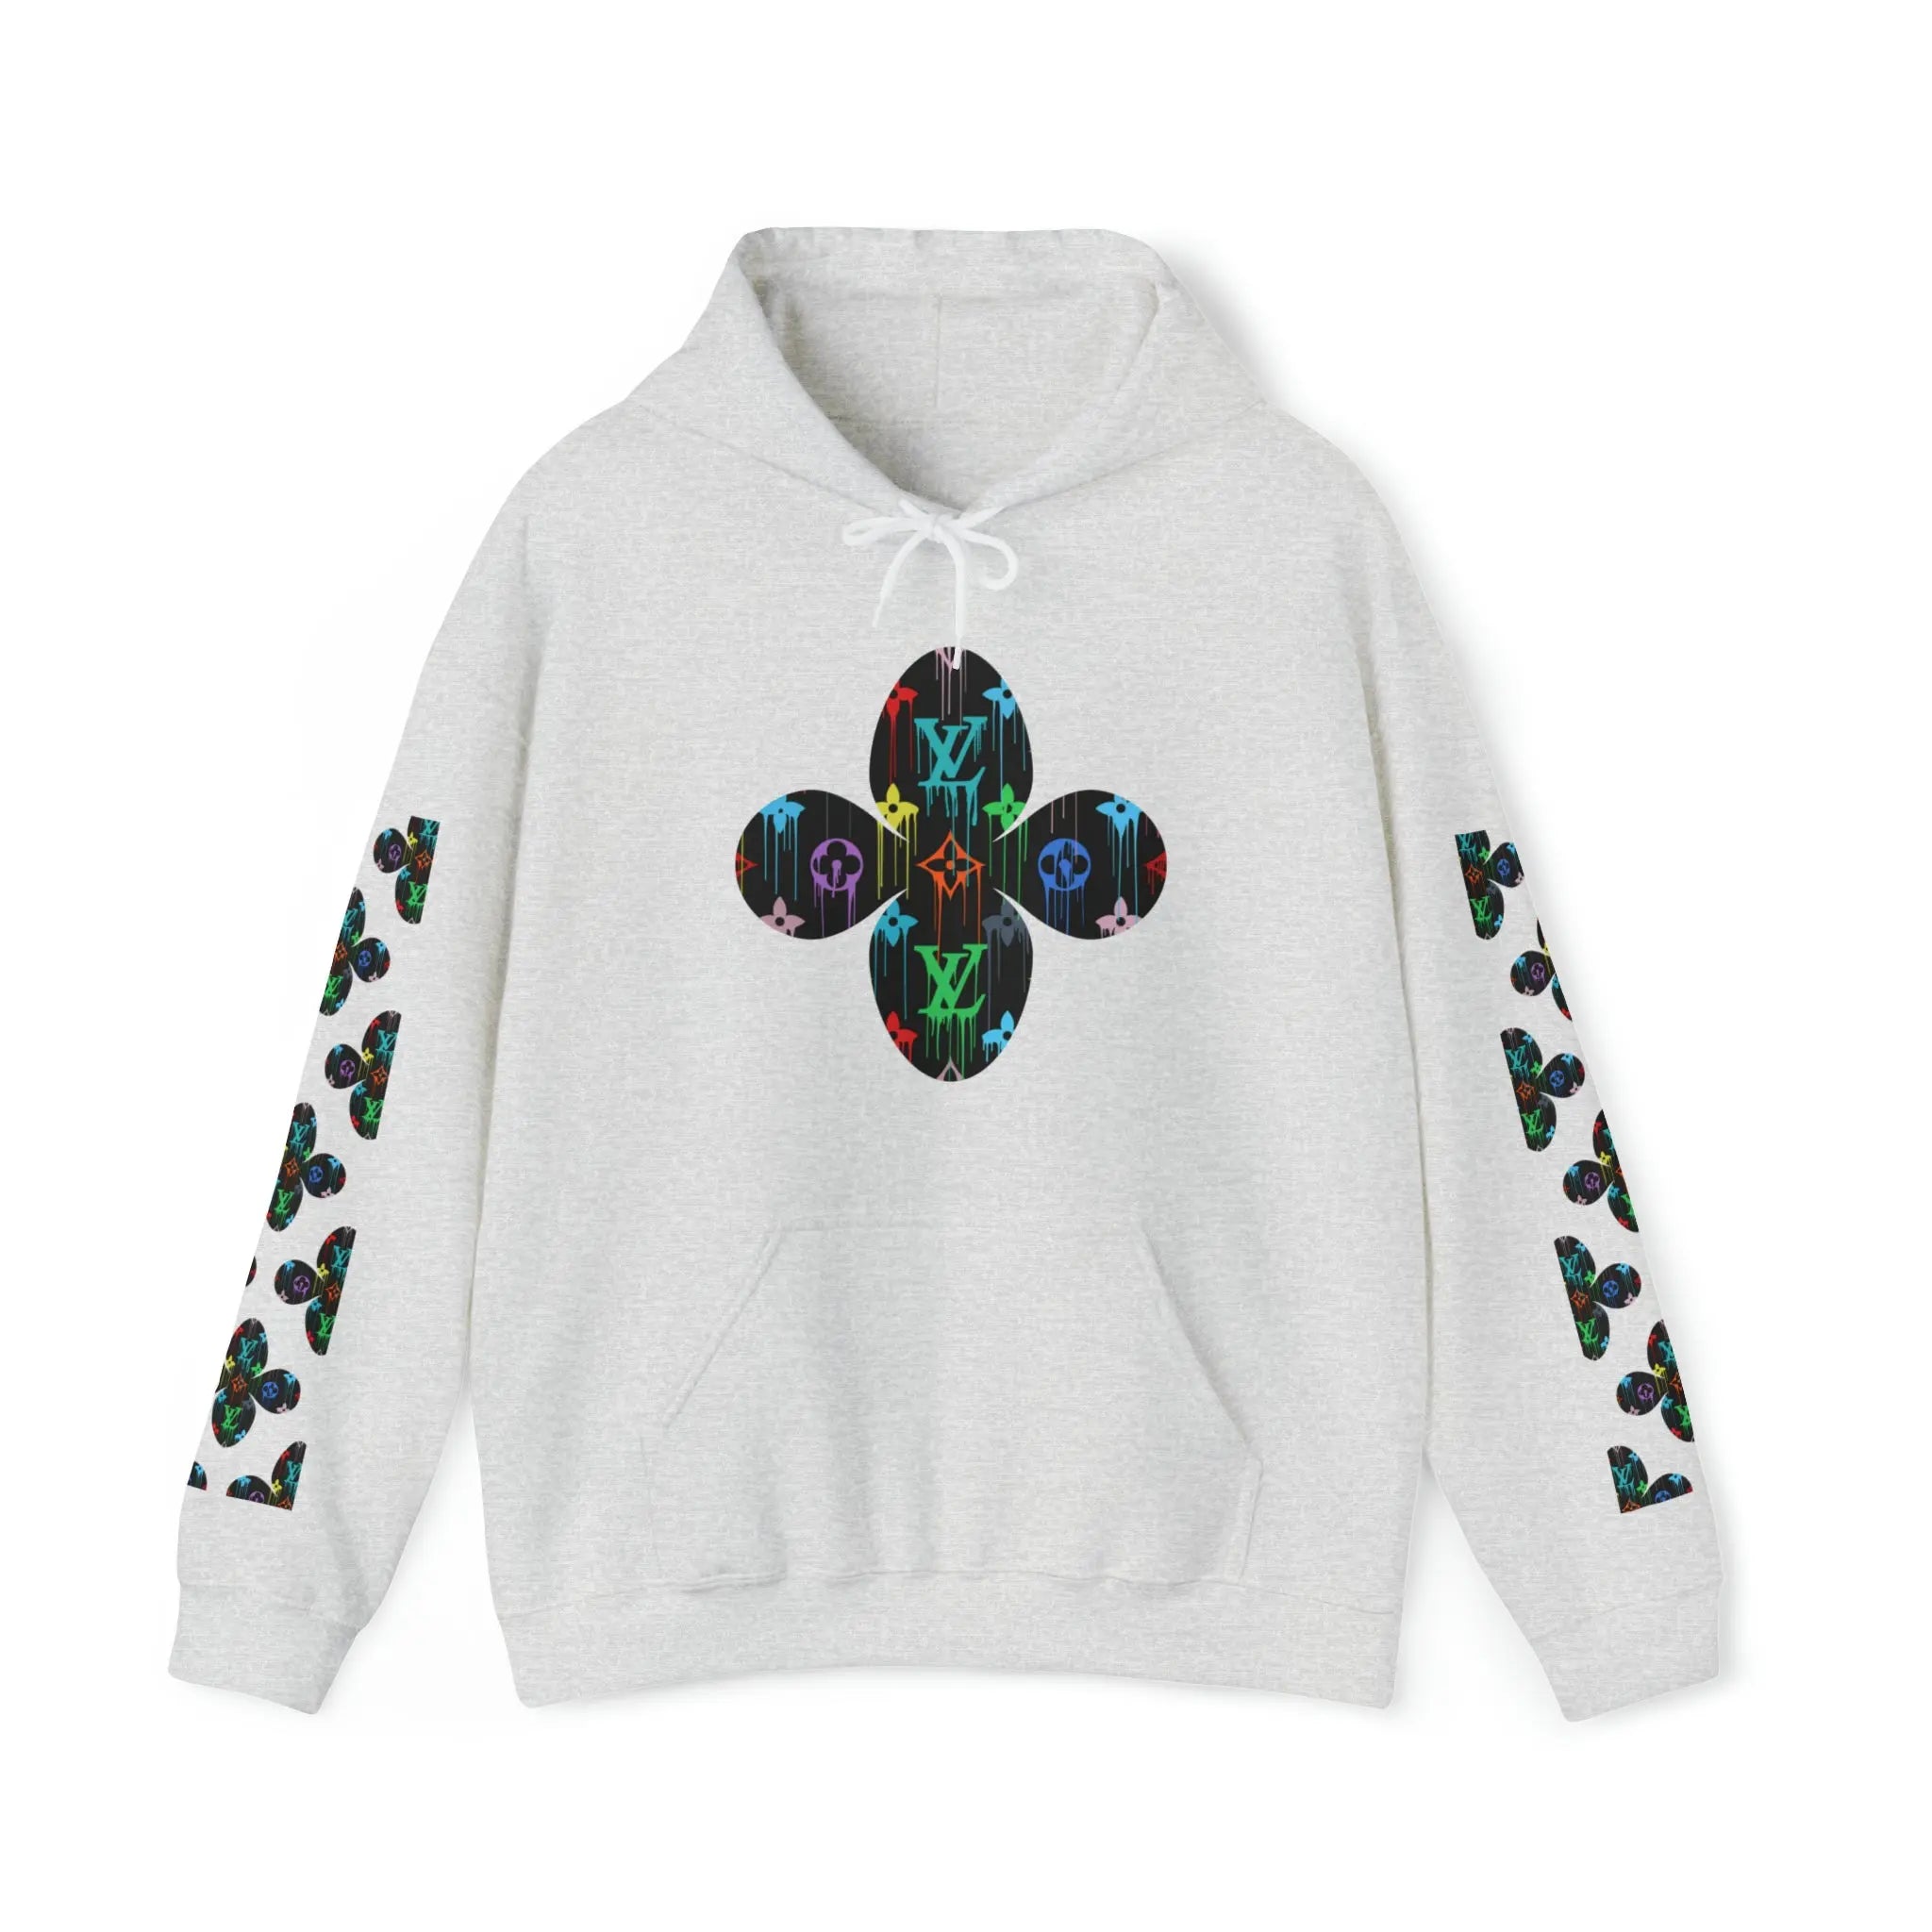  Multi-Colour Dripping Icons Flower with Sleeve Print Unisex Heavy Blend Hooded Sweatshirt HoodieAsh5XL